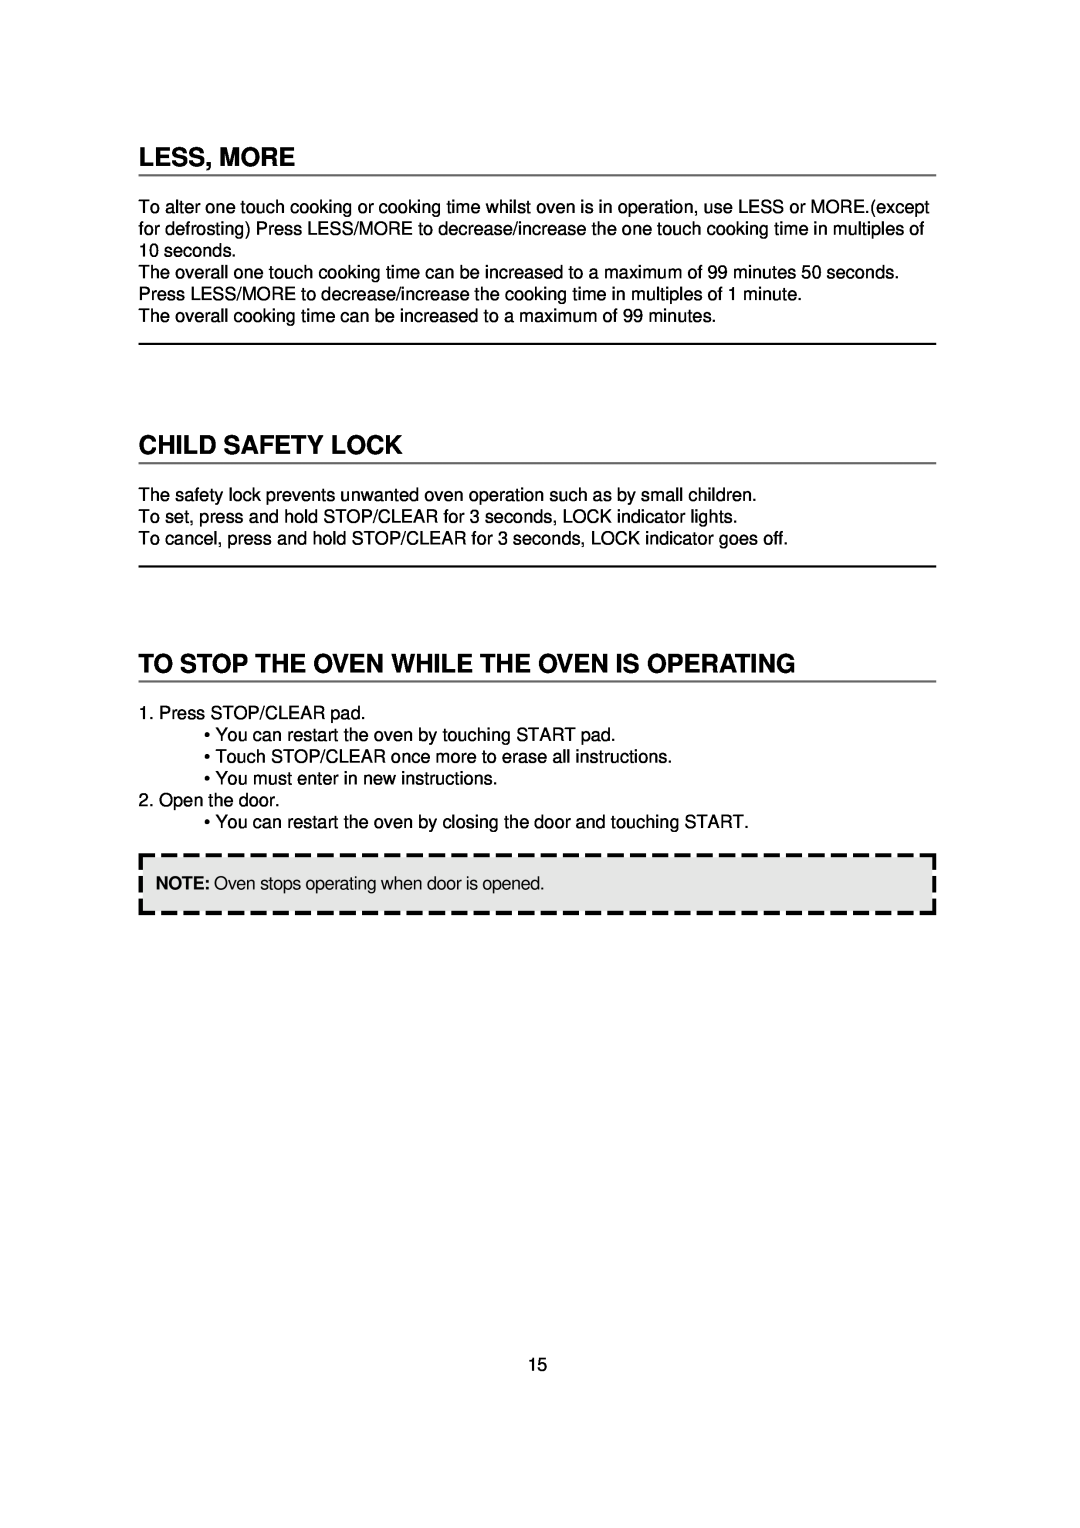 Magic Chef MCB1110B instruction manual Less, More, Child Safety Lock, To Stop The Oven While The Oven Is Operating 